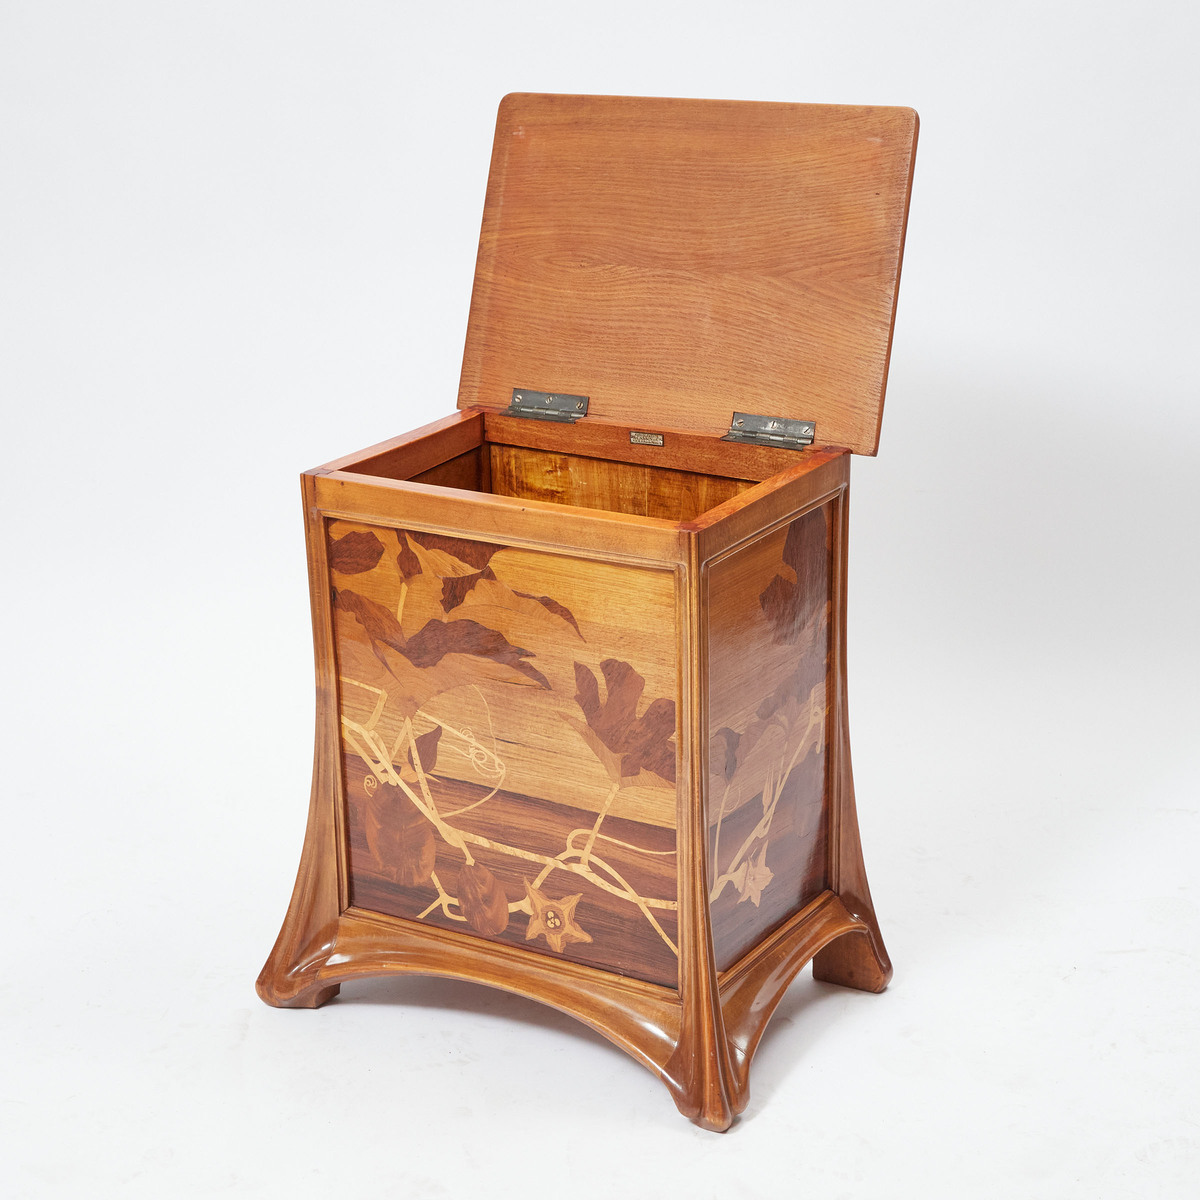 Louis Majorelle Walnut and Fruitwood Marquetry Blanket Chest, c.1900 - Image 2 of 2